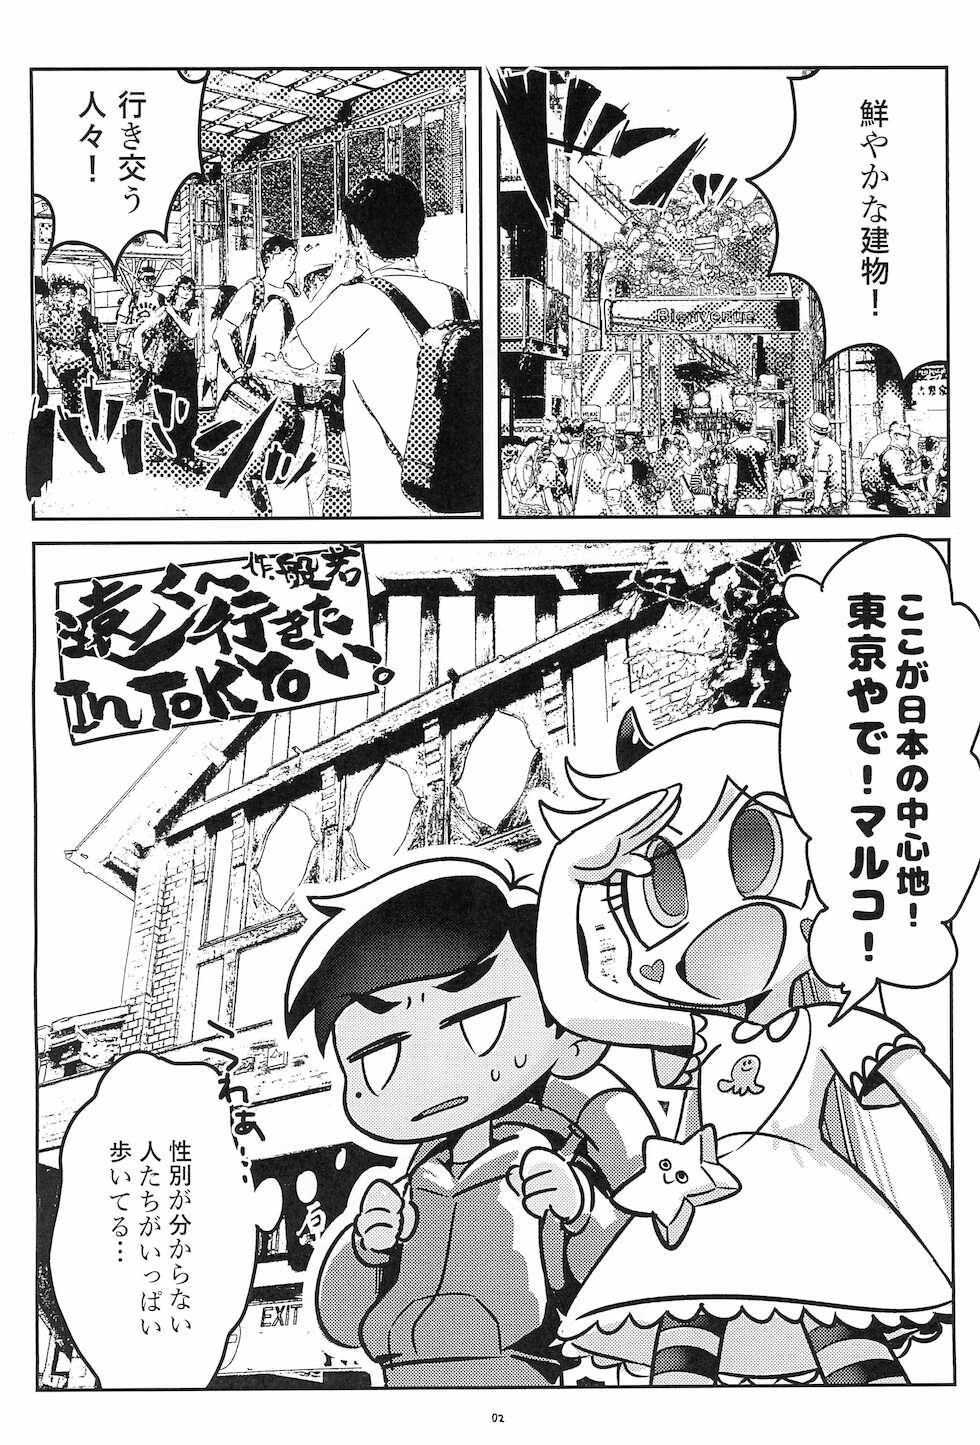 (C92) ["AAA" UDON SHOP (Moccha, Hanya)] Fashion MONSTER Party (Star vs. The Forces of Evil) - Page 6